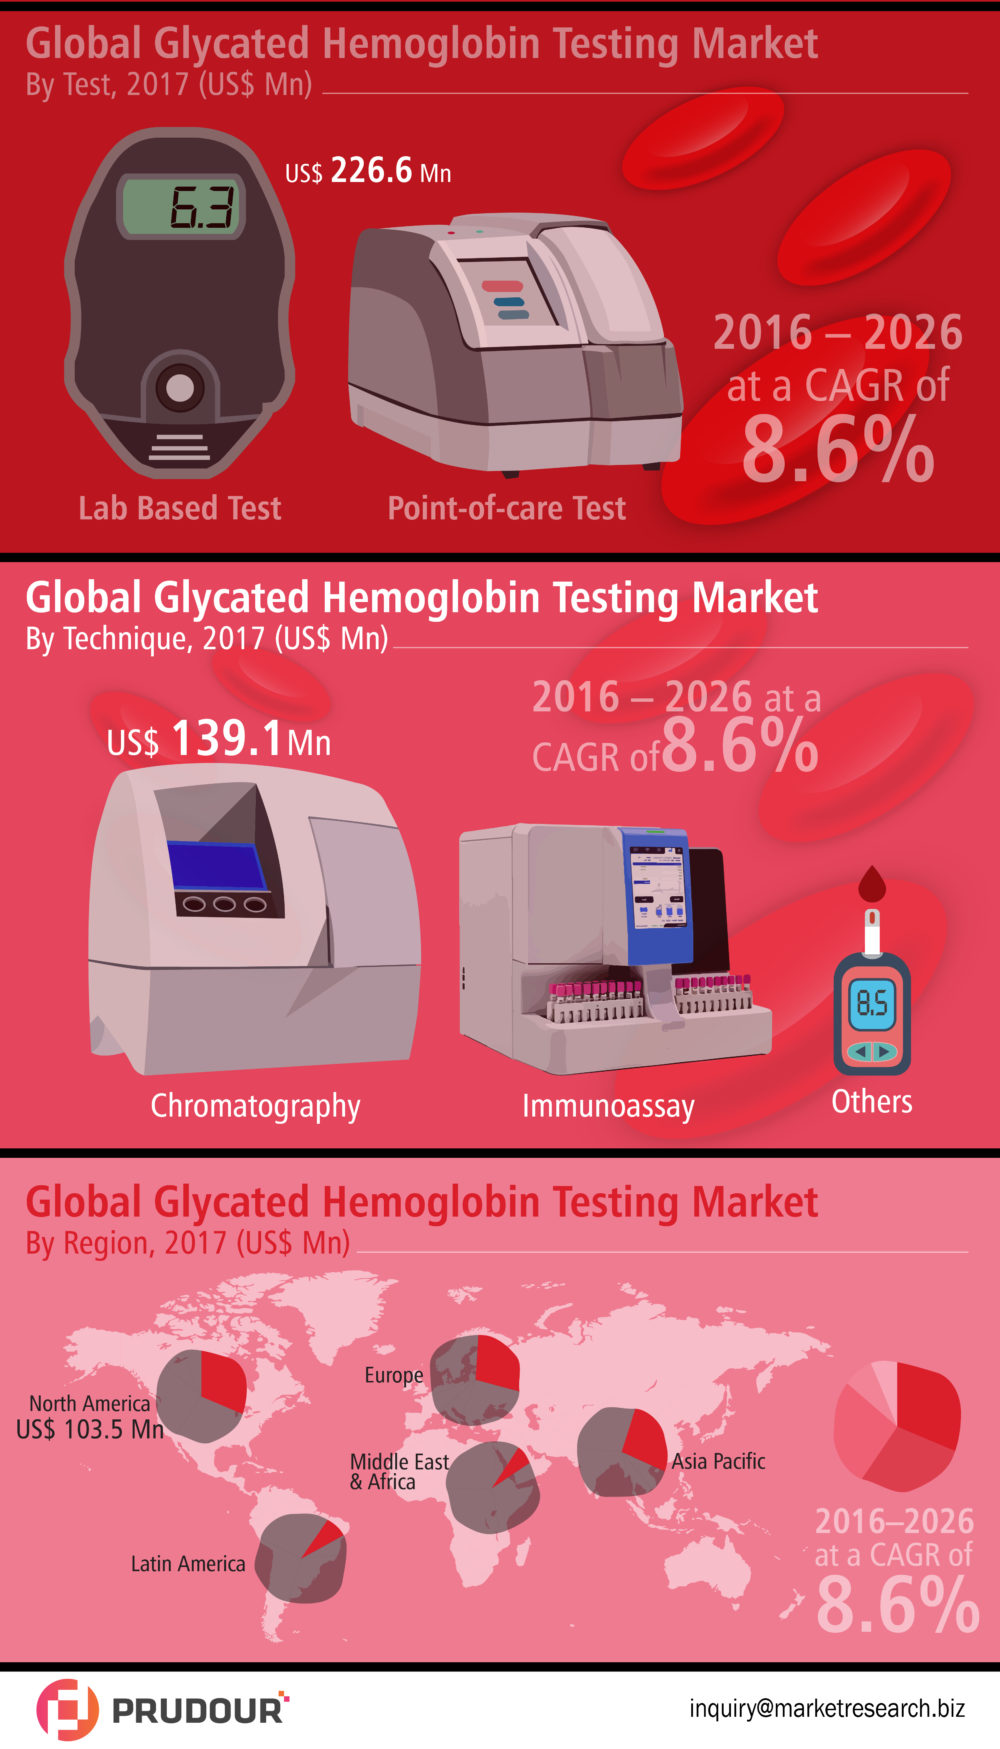 Global Glycated Hemoglobin Testing Market to Register A healthy Growth of US$ 650 Mn by 2026